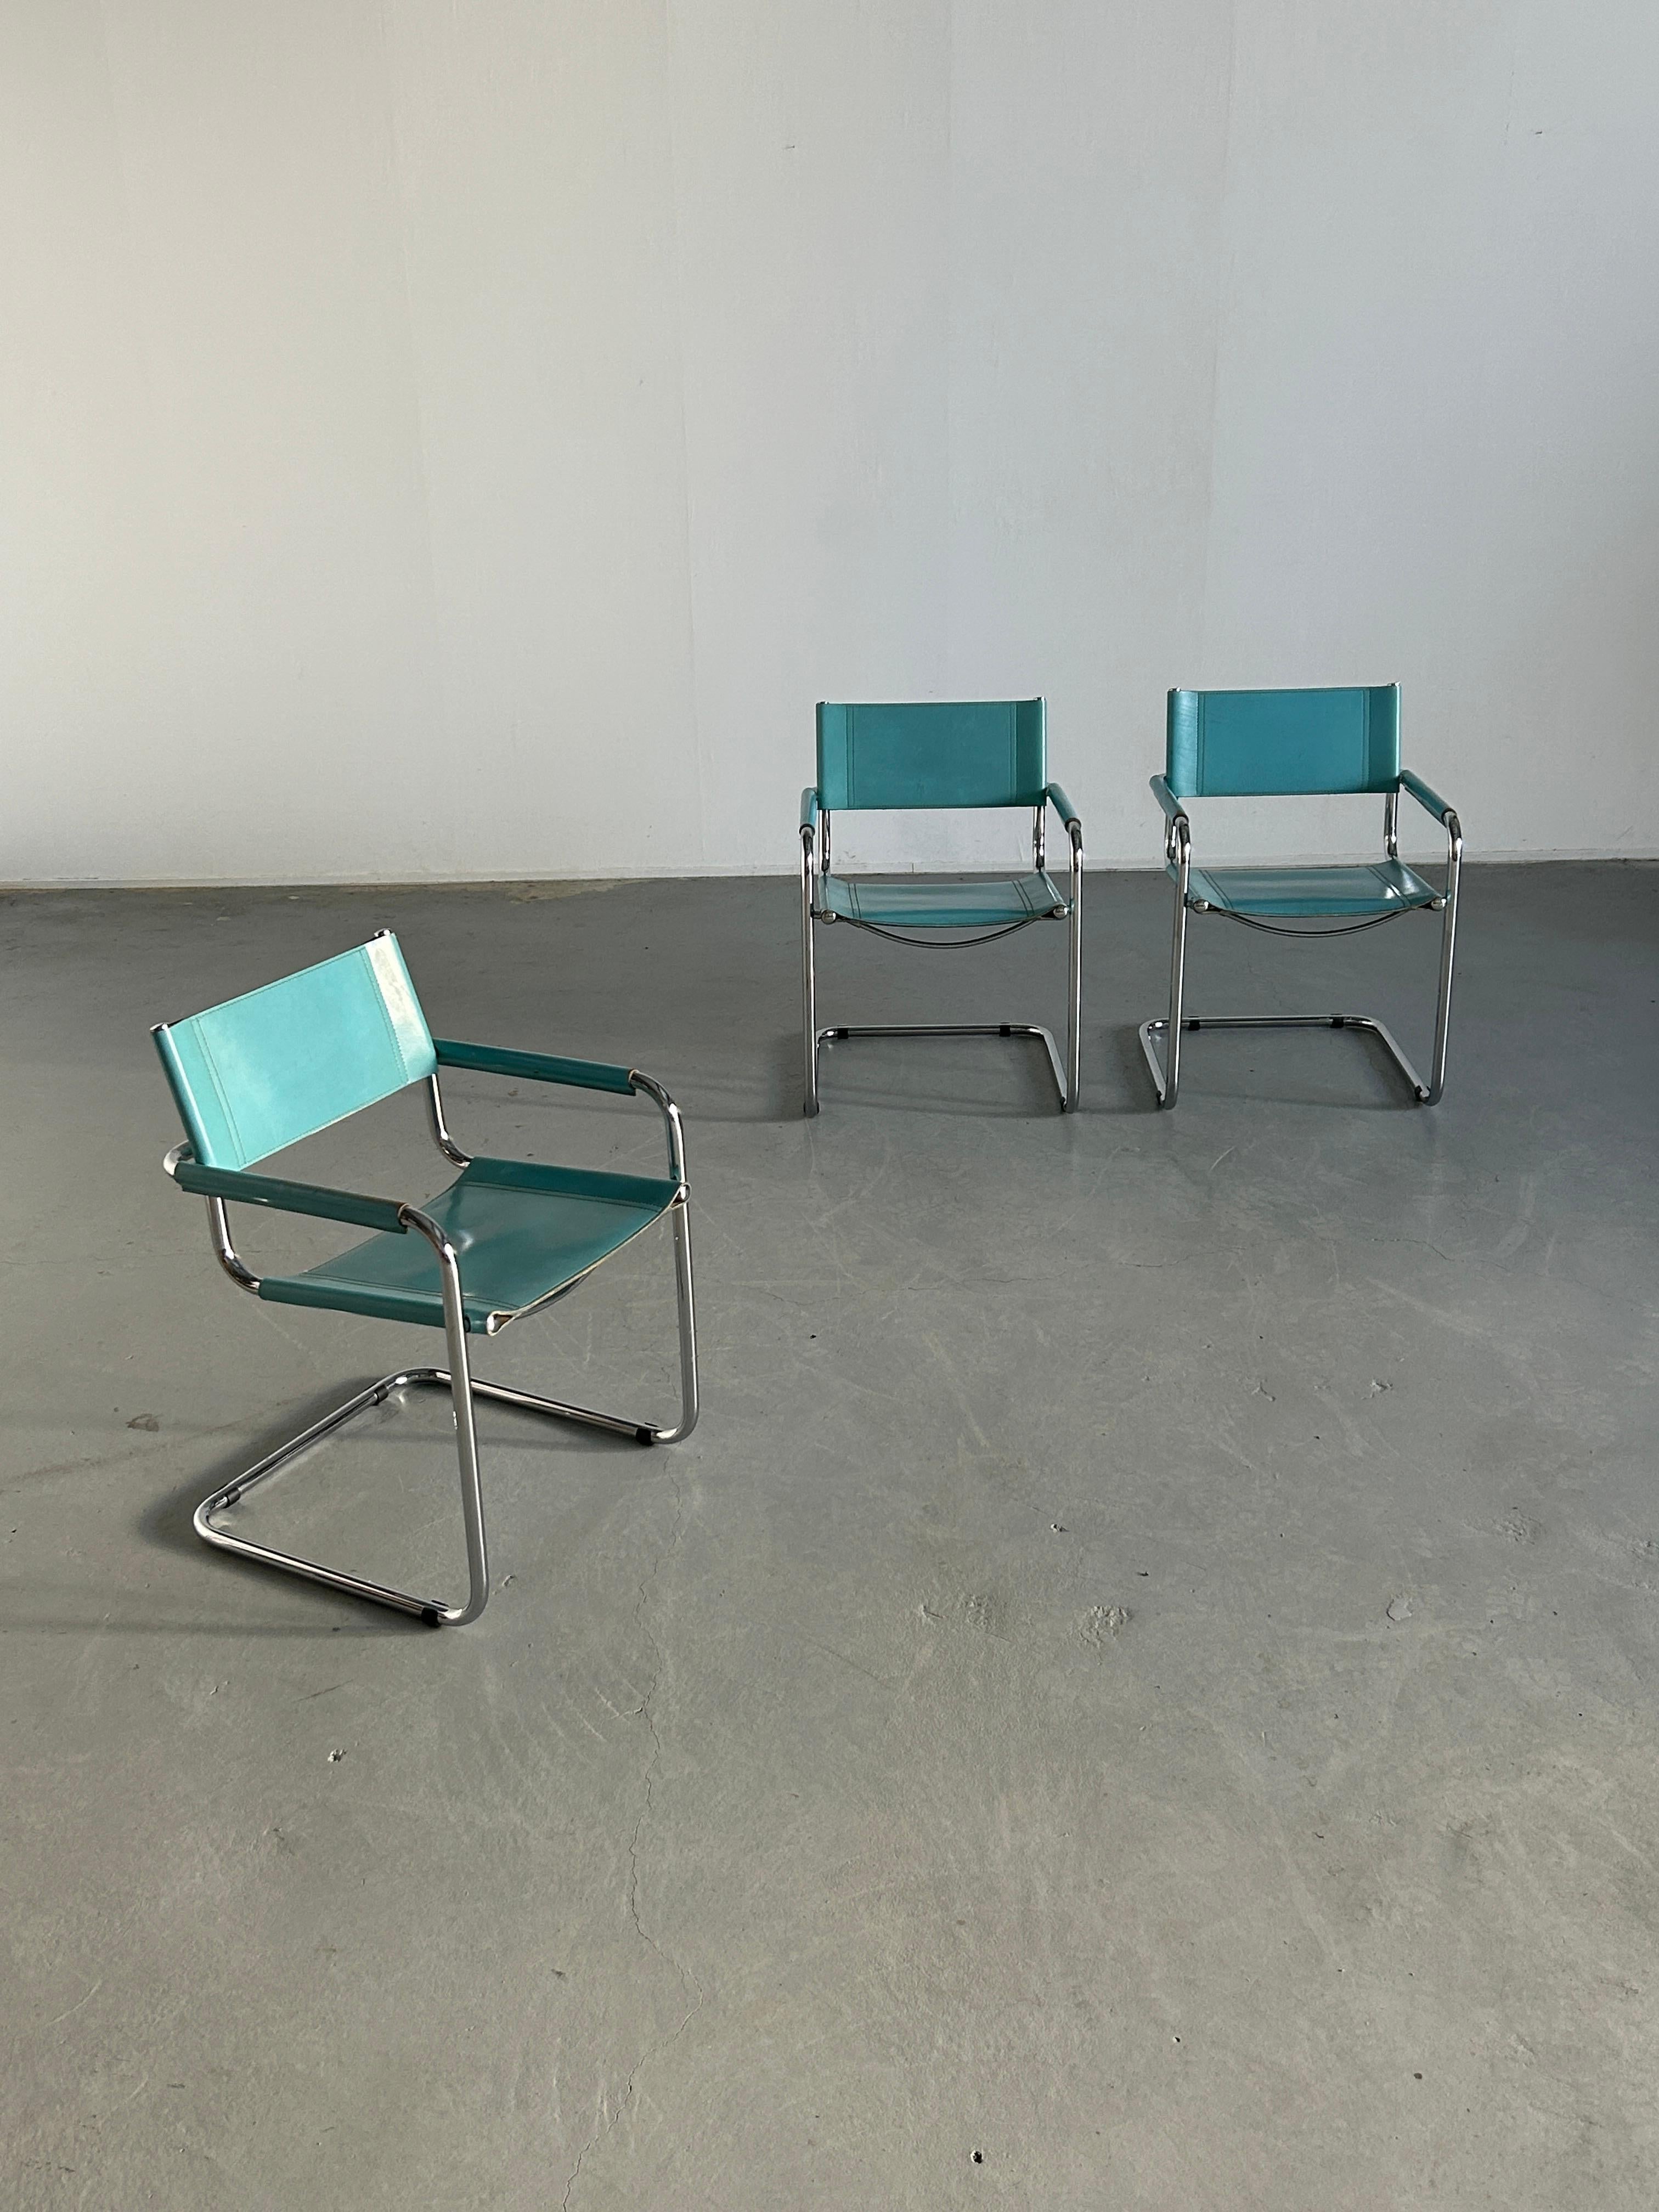 Three vintage Bauhaus design cantilever armchairs with a chrome plated tubular steel frame and teal blue leather seating and backrest.
Following the design of the S34 chair, designed in the 1920s by Mart Stam, designer of the first cantilever chair.